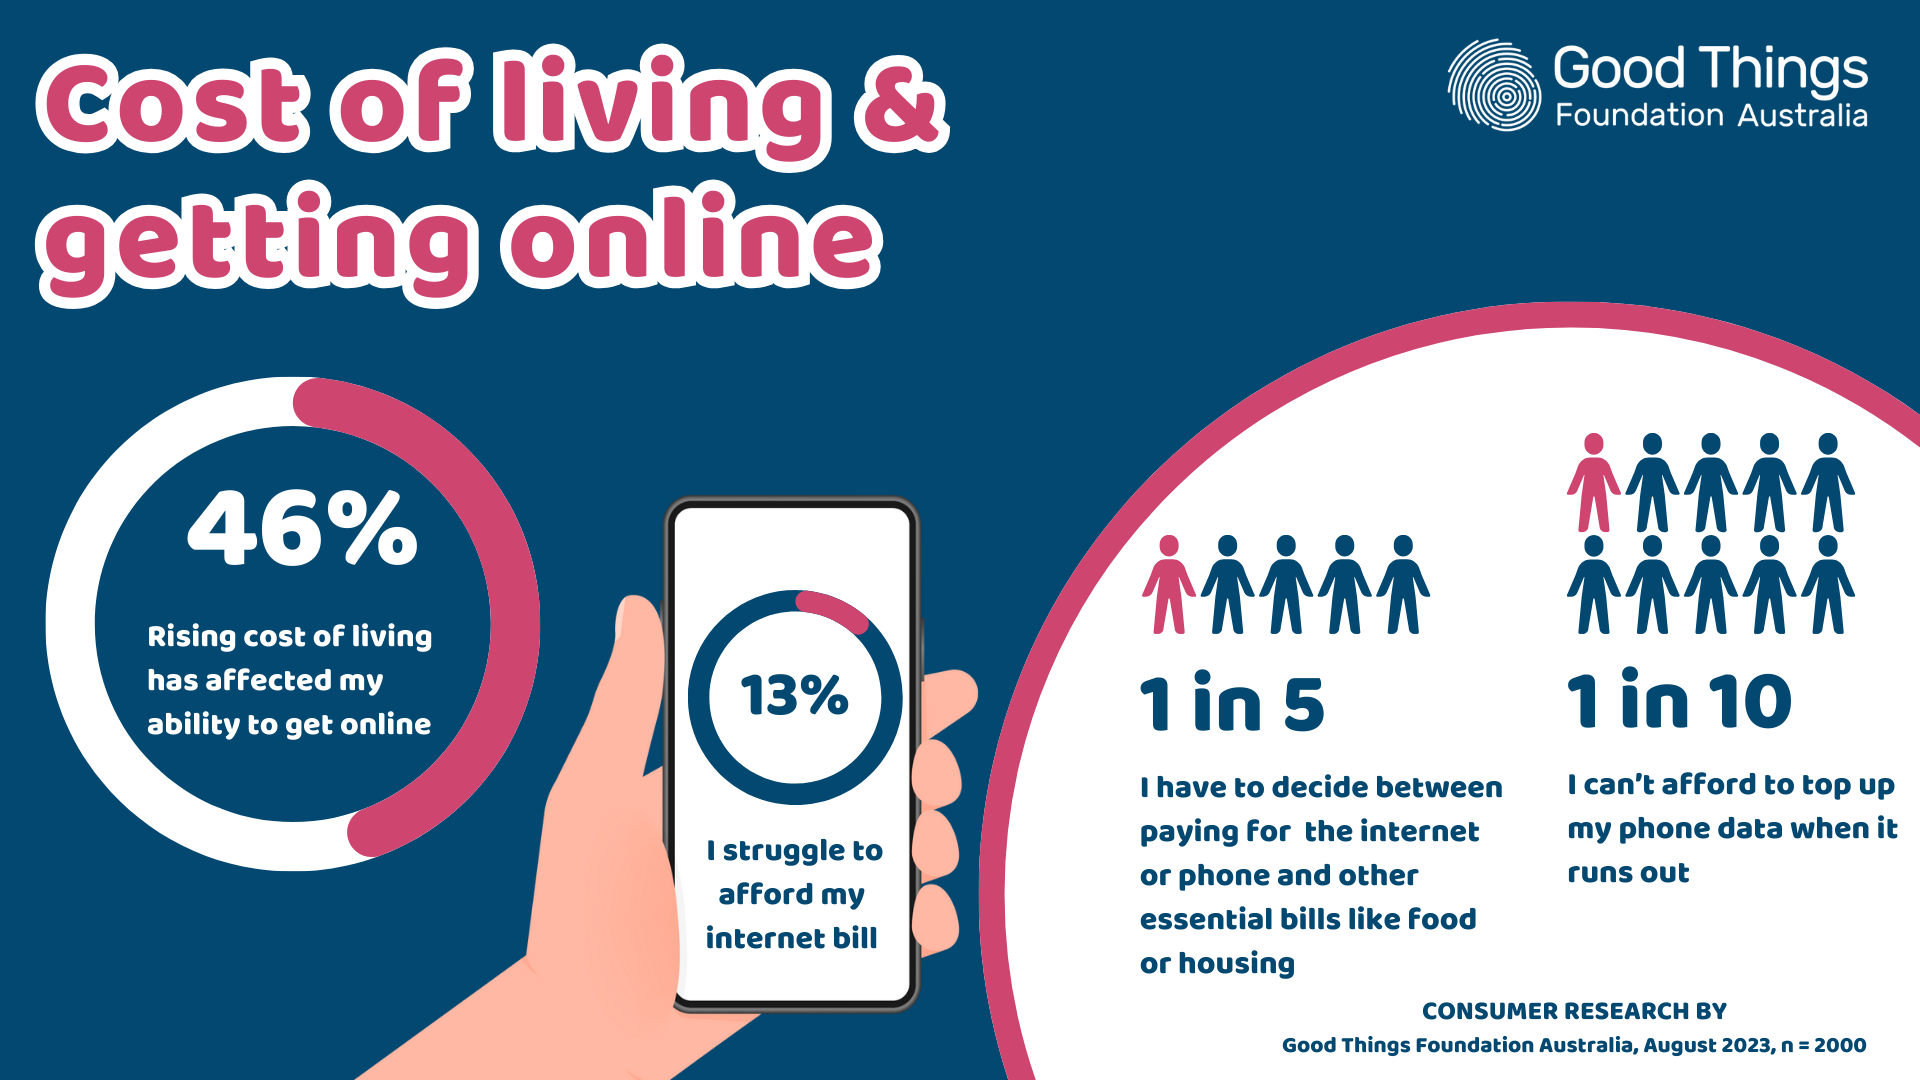 Cost of living and Getting online infographic. Illustrates: 46% Rising cost of living has affected my ability to get online 13% I struggle to afford my internet bill 1 in 5 I have to decide between paying for the internet or phone and other essential bills like food or housing 1 in 10 I can’t afford to top up my phone data when it runs out